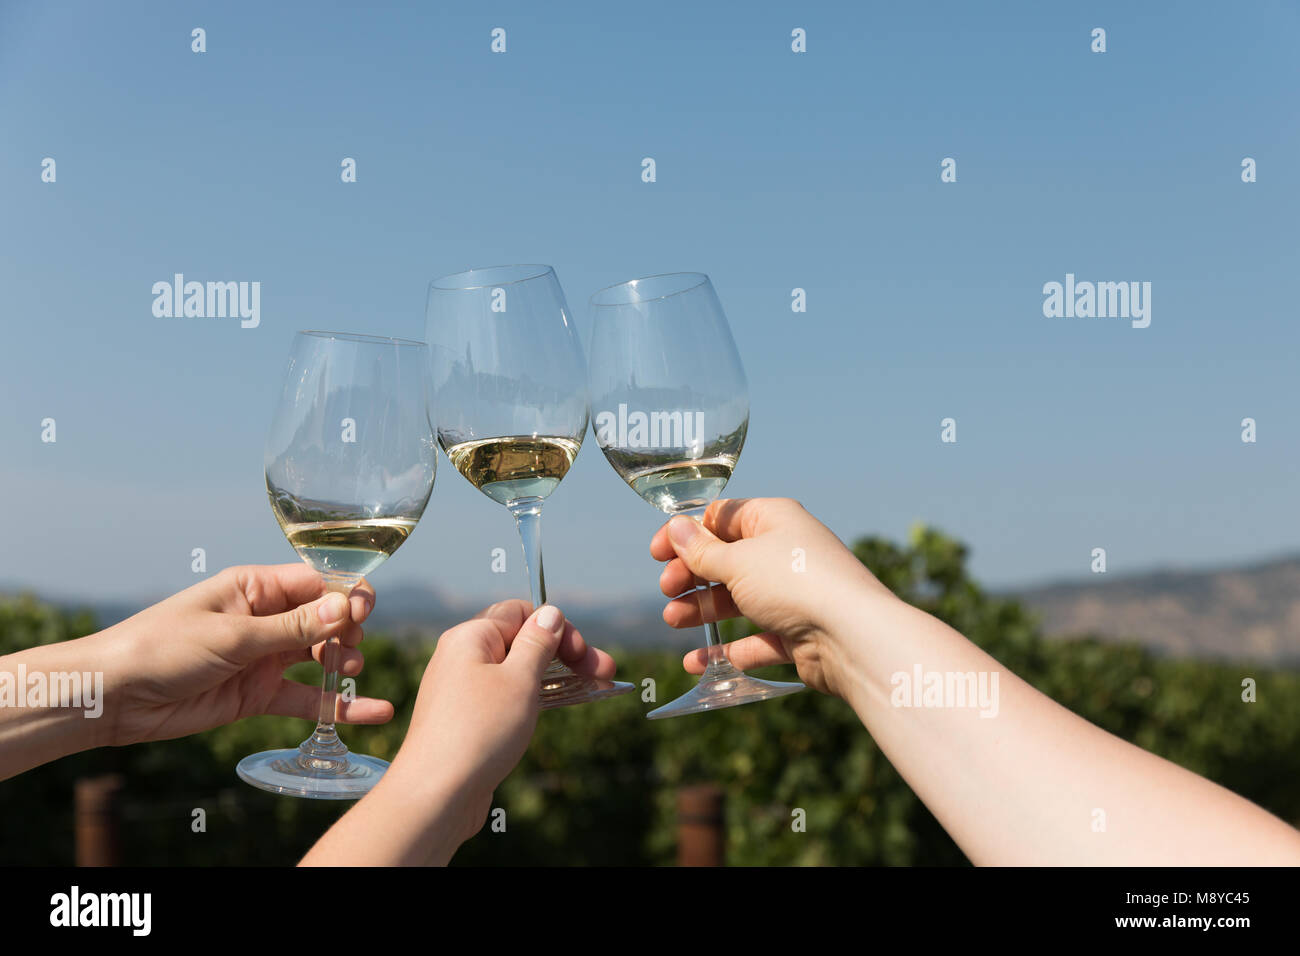 Three women clinking glasses of white wine in celebration in a vineyard Stock Photo